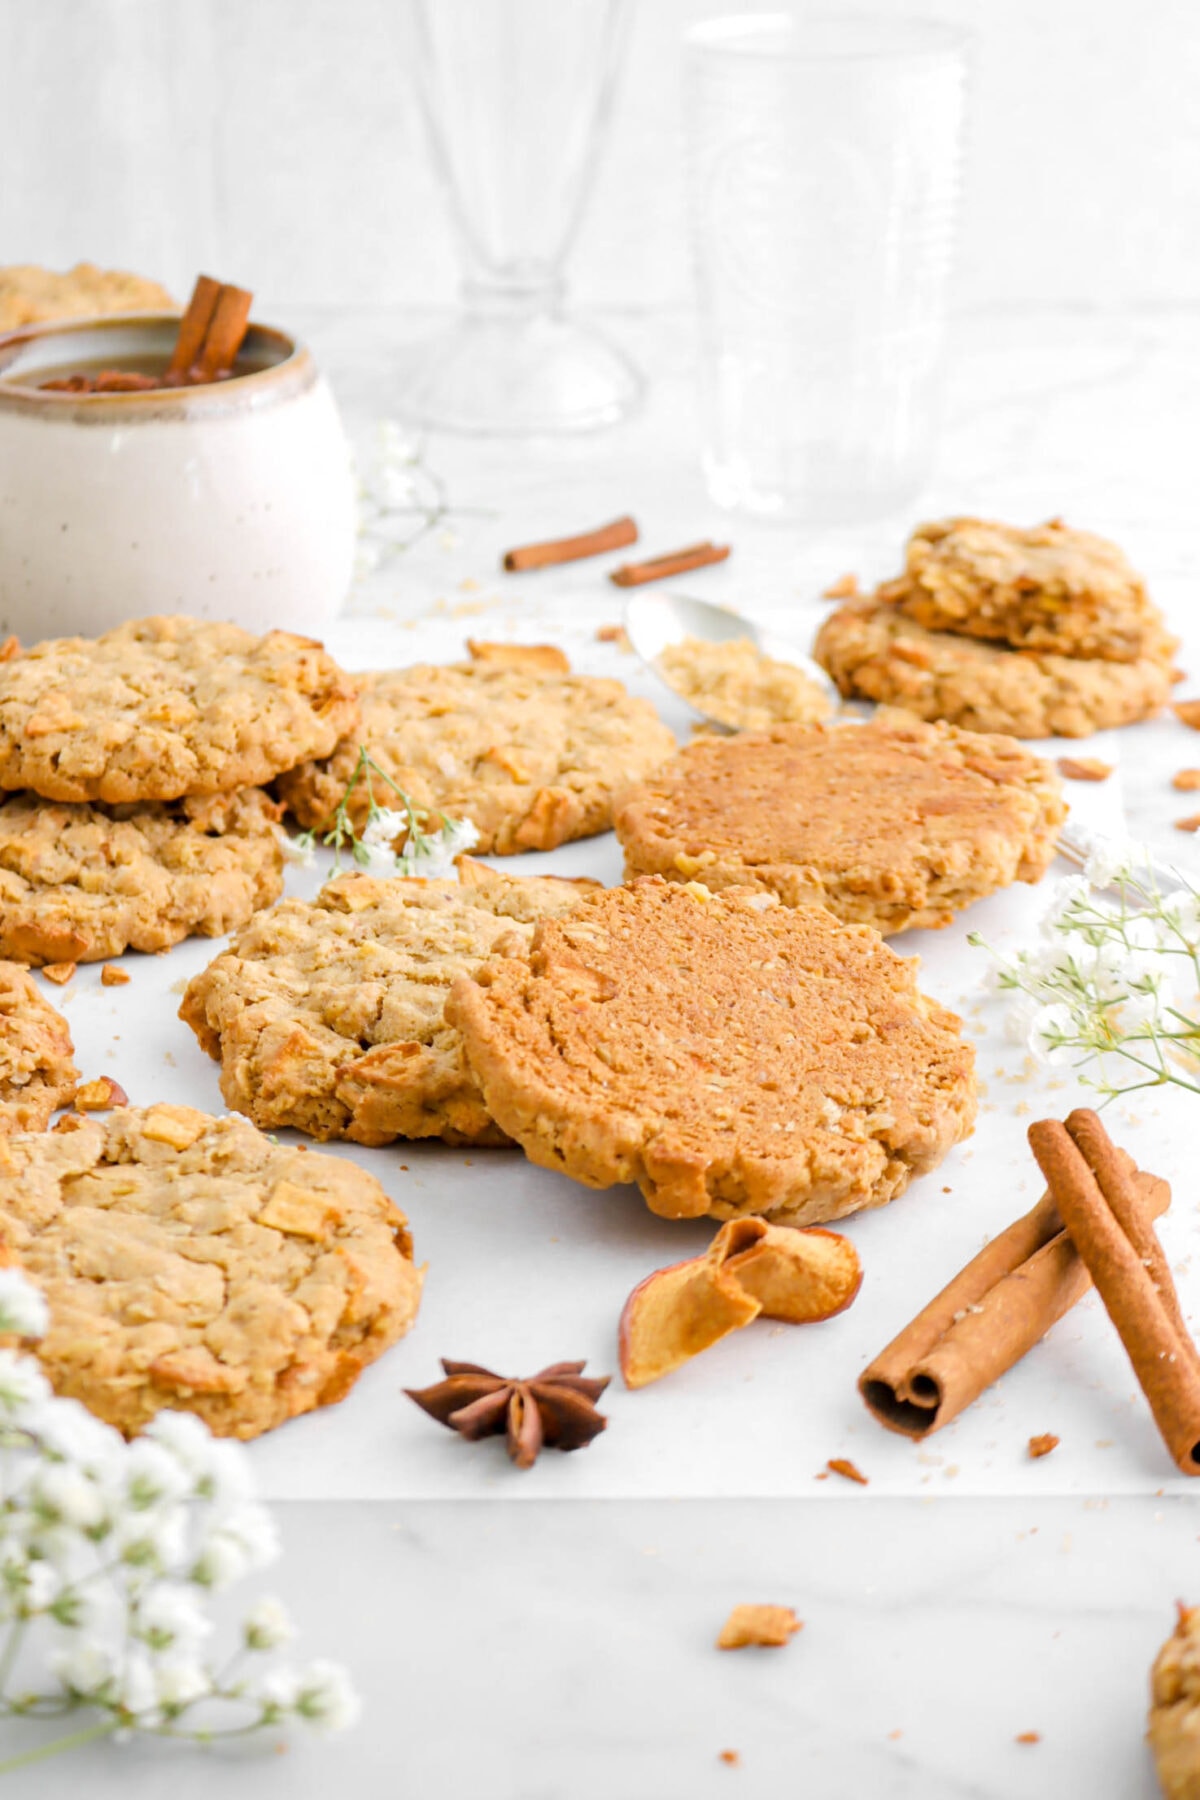 front shot of two cookies leaning against each other, one upside down, with while spices, dried apples, white flowers, and more cookies around on marble surface